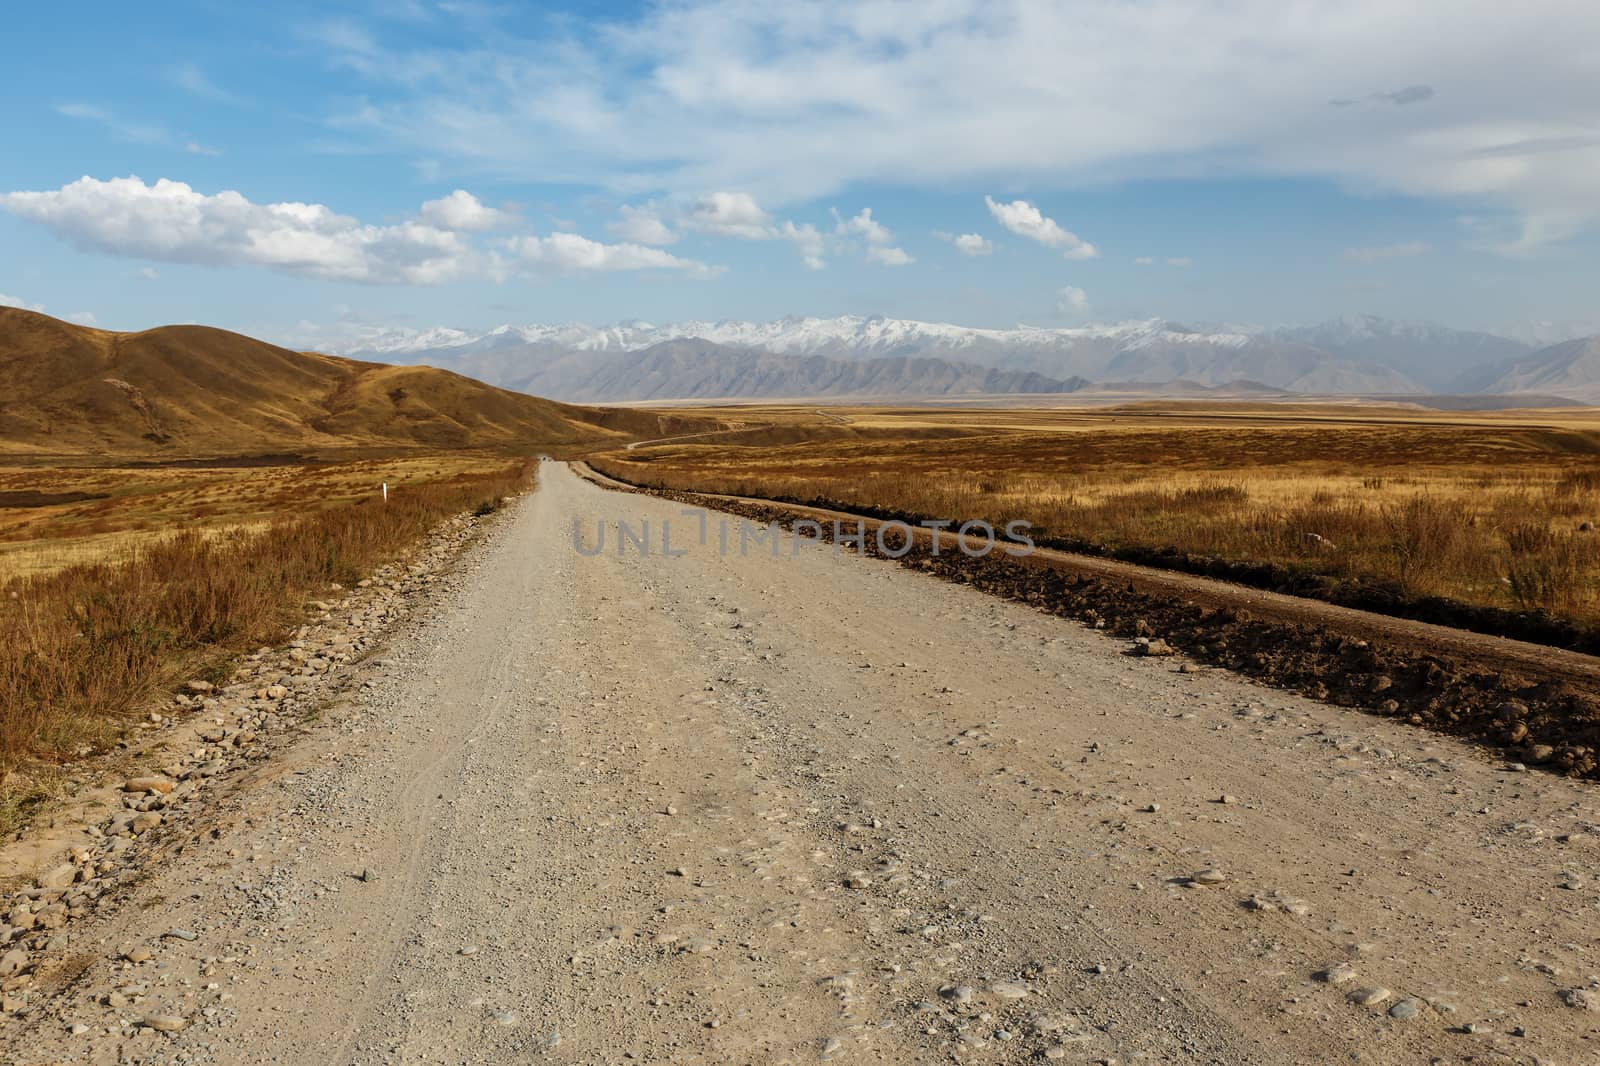 A367 highway passing in the Chui region, Kyrgyzstan by Mieszko9